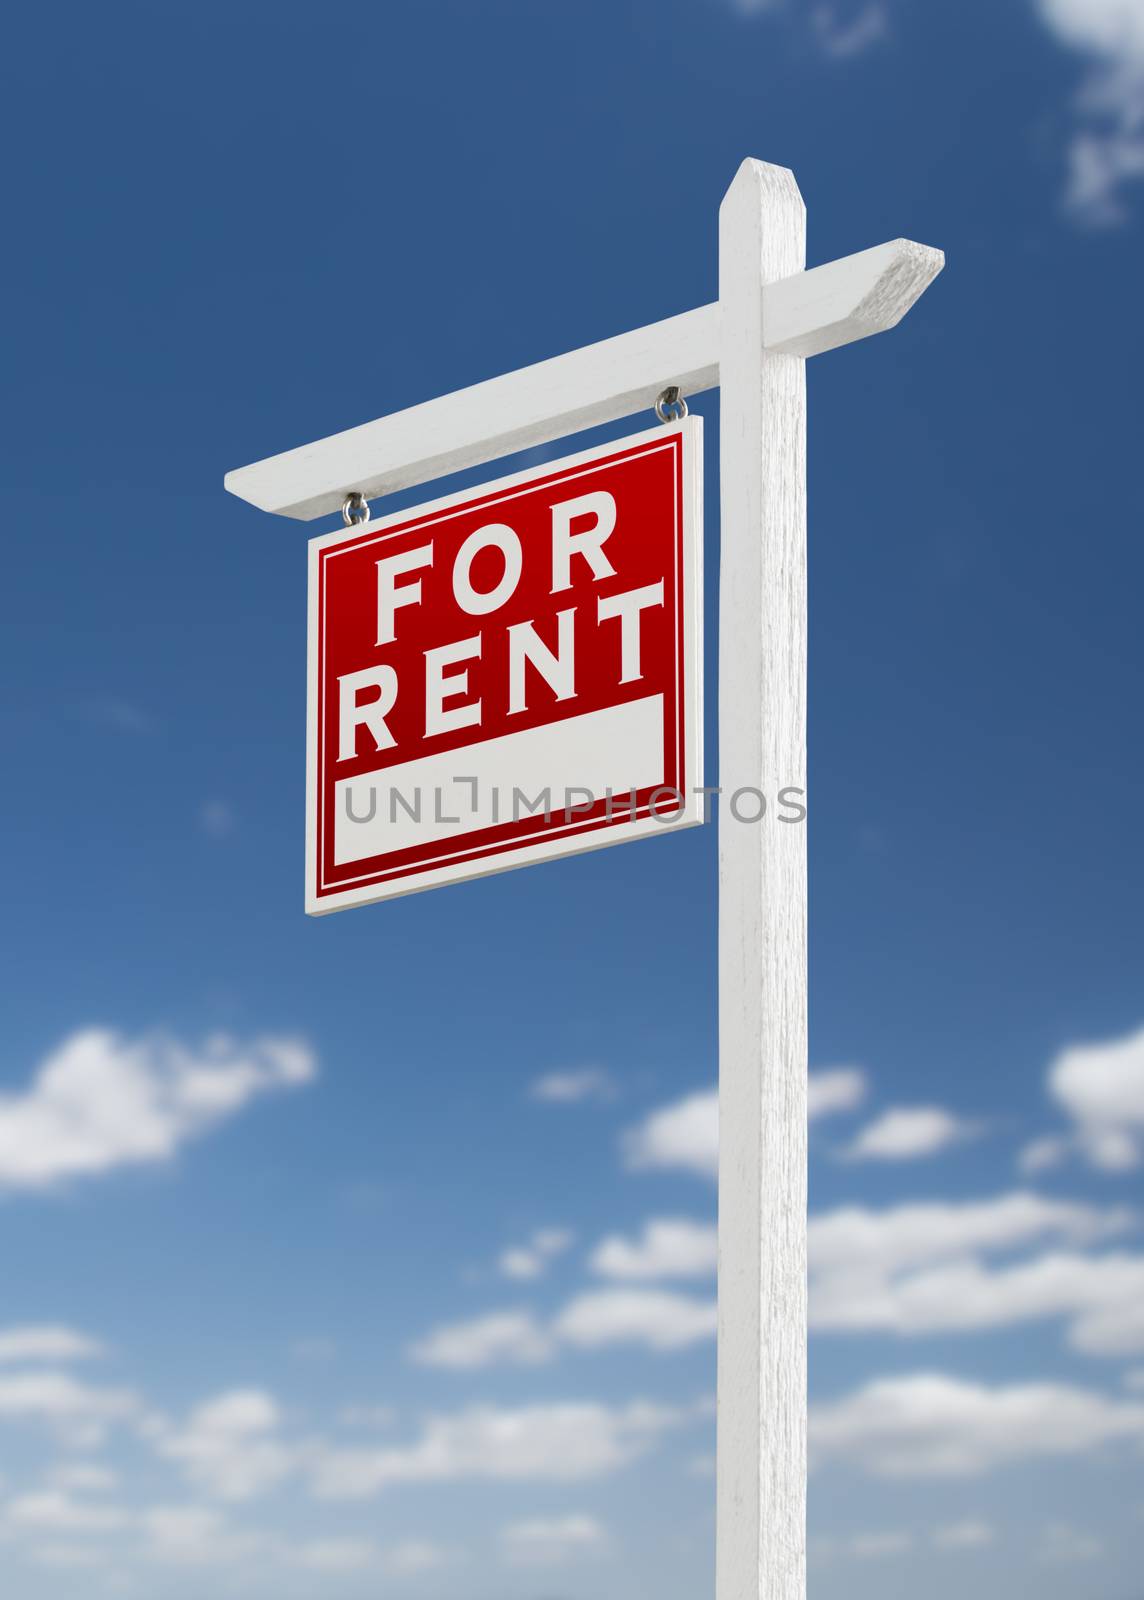 Left Facing For Rent Real Estate Sign on a Blue Sky with Clouds.